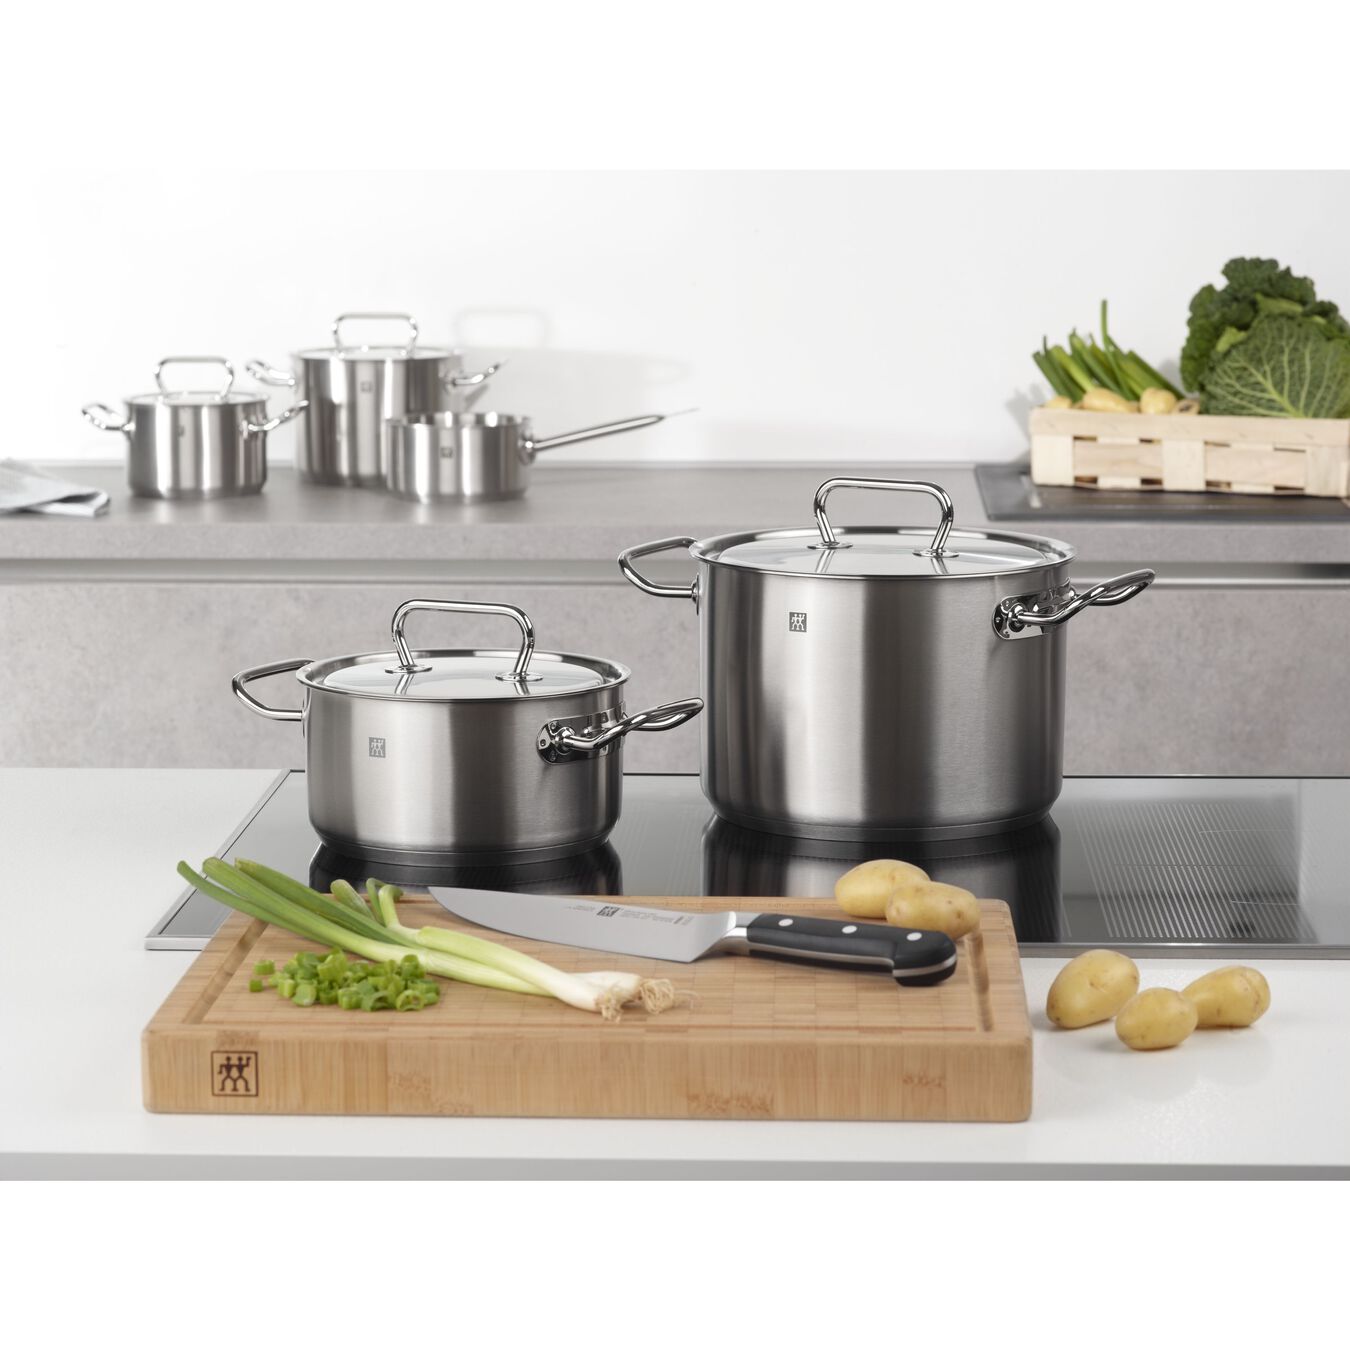 16 cm 18/10 Stainless Steel Stock pot,,large 3